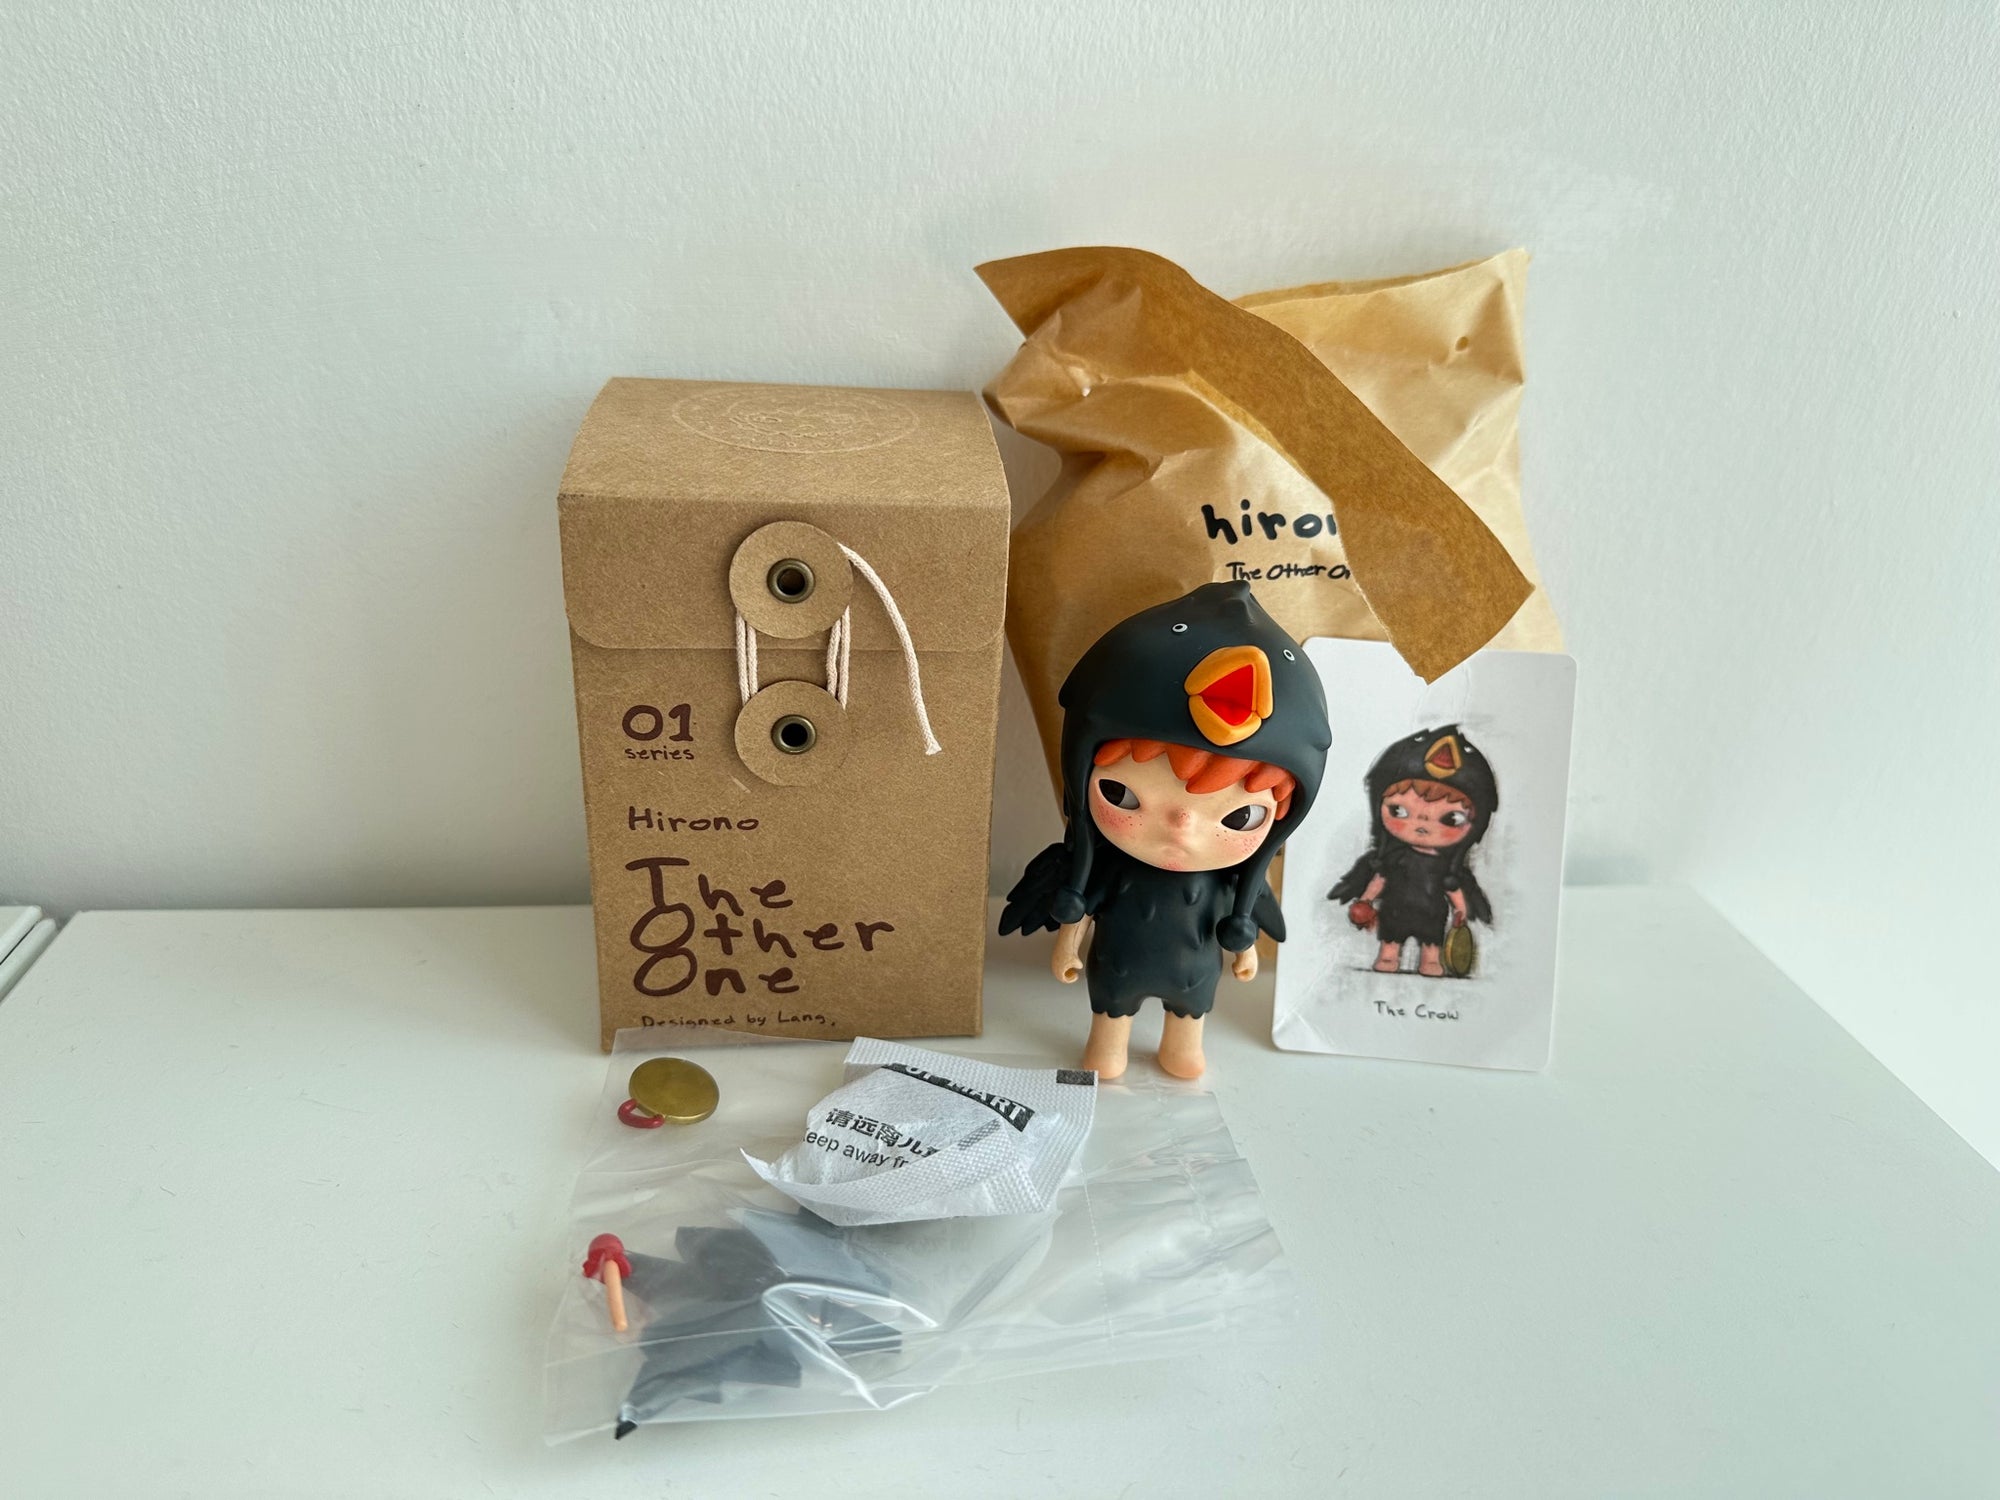 The Crow - Hirono The Other One Blind Box Series by POP MART - 1